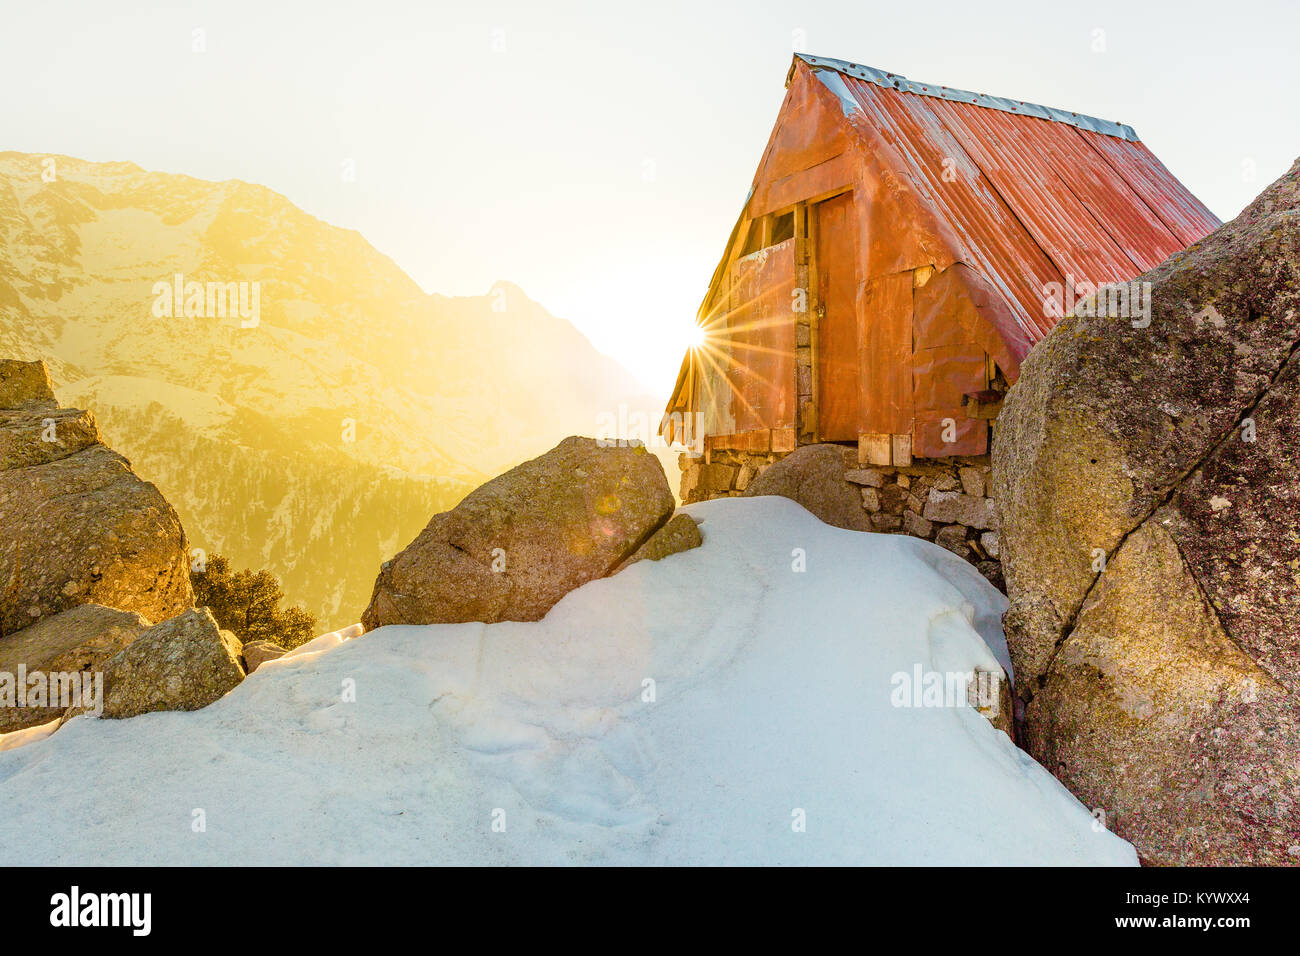 Secluded & beautiful Cabin in the snow mountains at Triund hill top, Mcleod ganj, Dharamsala, India during amazing sunrise from behind the mountains Stock Photo